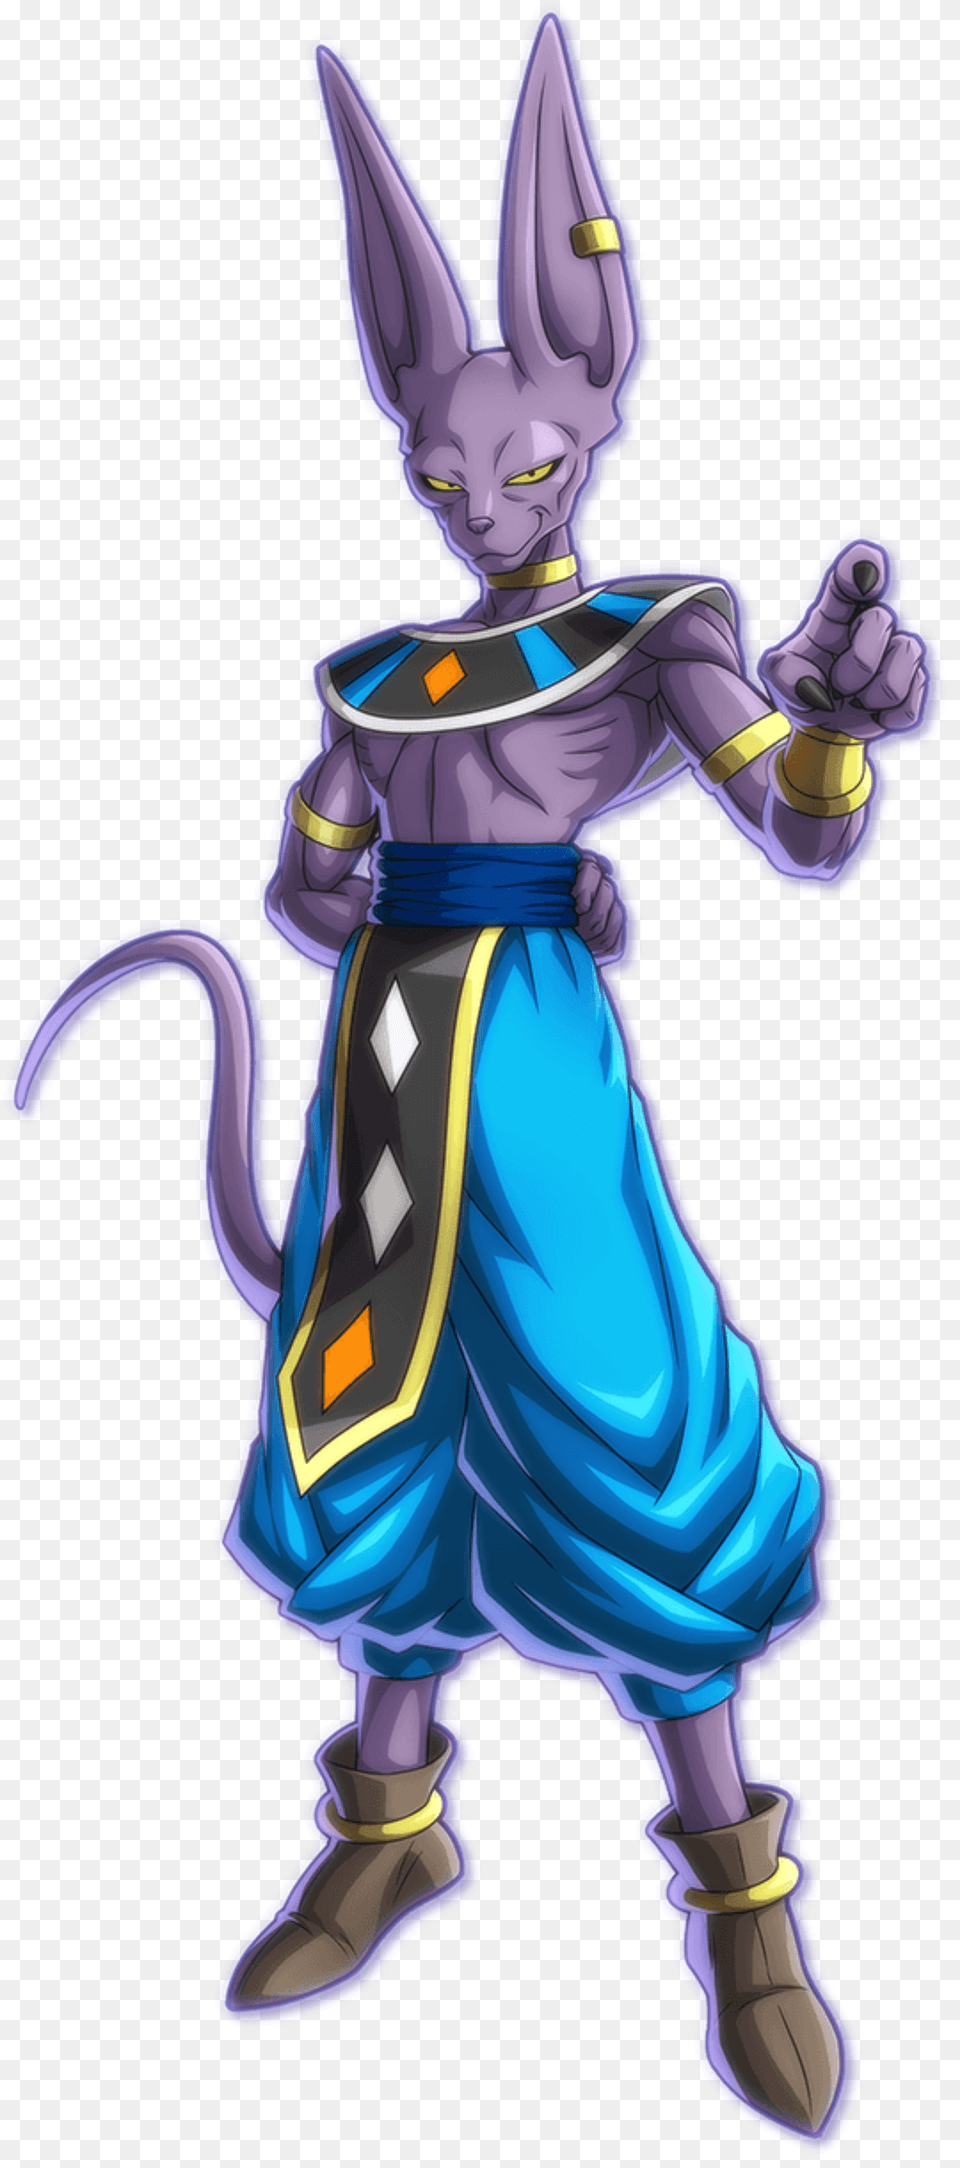 Dragon Ball Fighterz Image Dragon Ball Fighterz Beerus Free Transparent Png